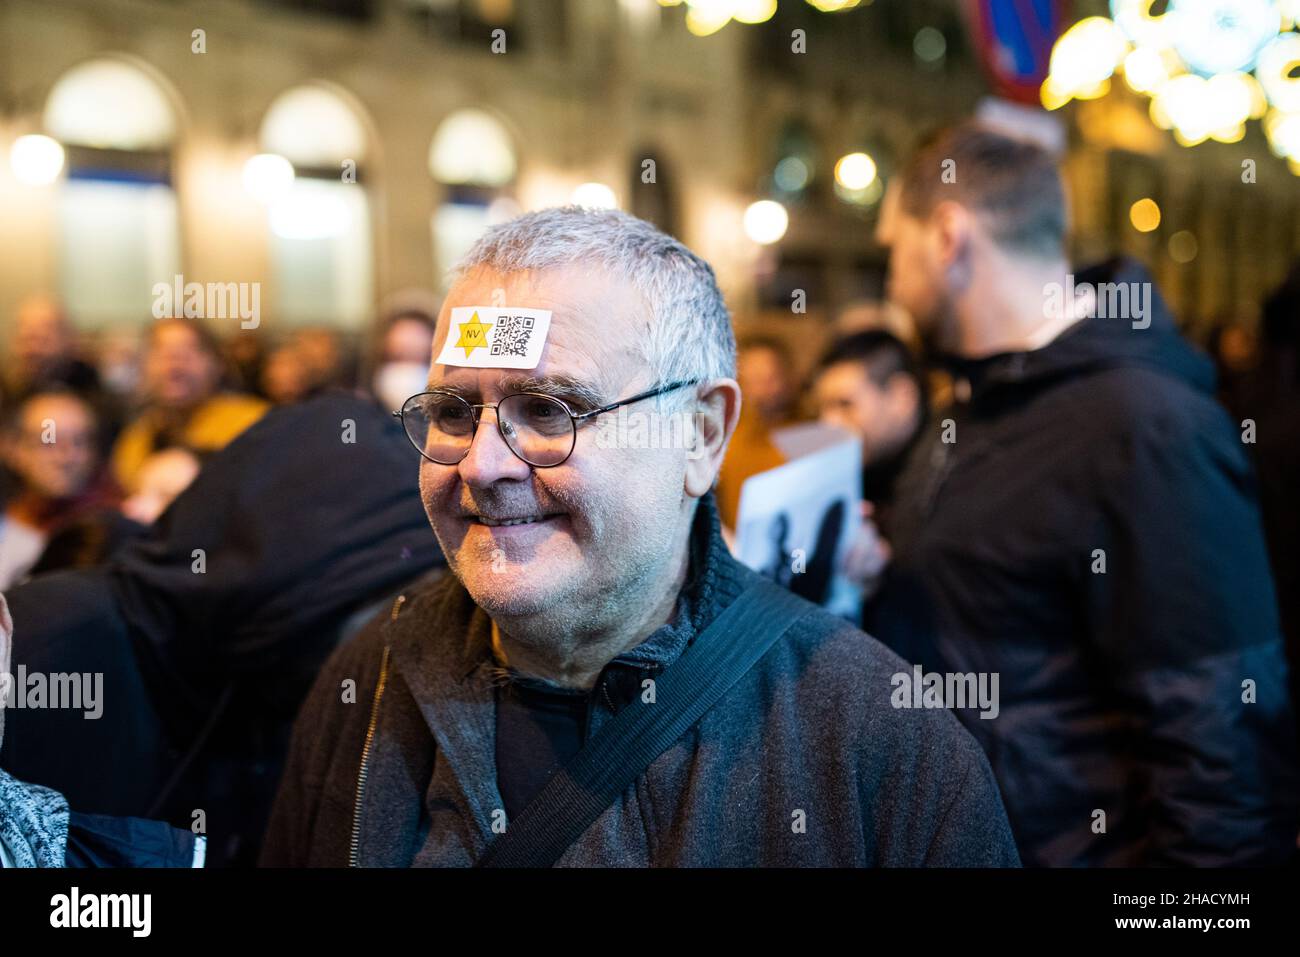 Spain. 11th Dec, 2021. A man wears a yellow star, know as Jewish Badge, with a qr code on it, during a demonstration of the antivax movement against the Covid vaccines and the Covid vaccination certificate known as Green Pass in the Barcelona city center in Spain on December 11, 2021. The Covid-19 passport is known required for access to bars and restaurants in Catalonia and other regions of Spain. (Photo by Davide Bonaldo/Sipa USA) Credit: Sipa USA/Alamy Live News Stock Photo